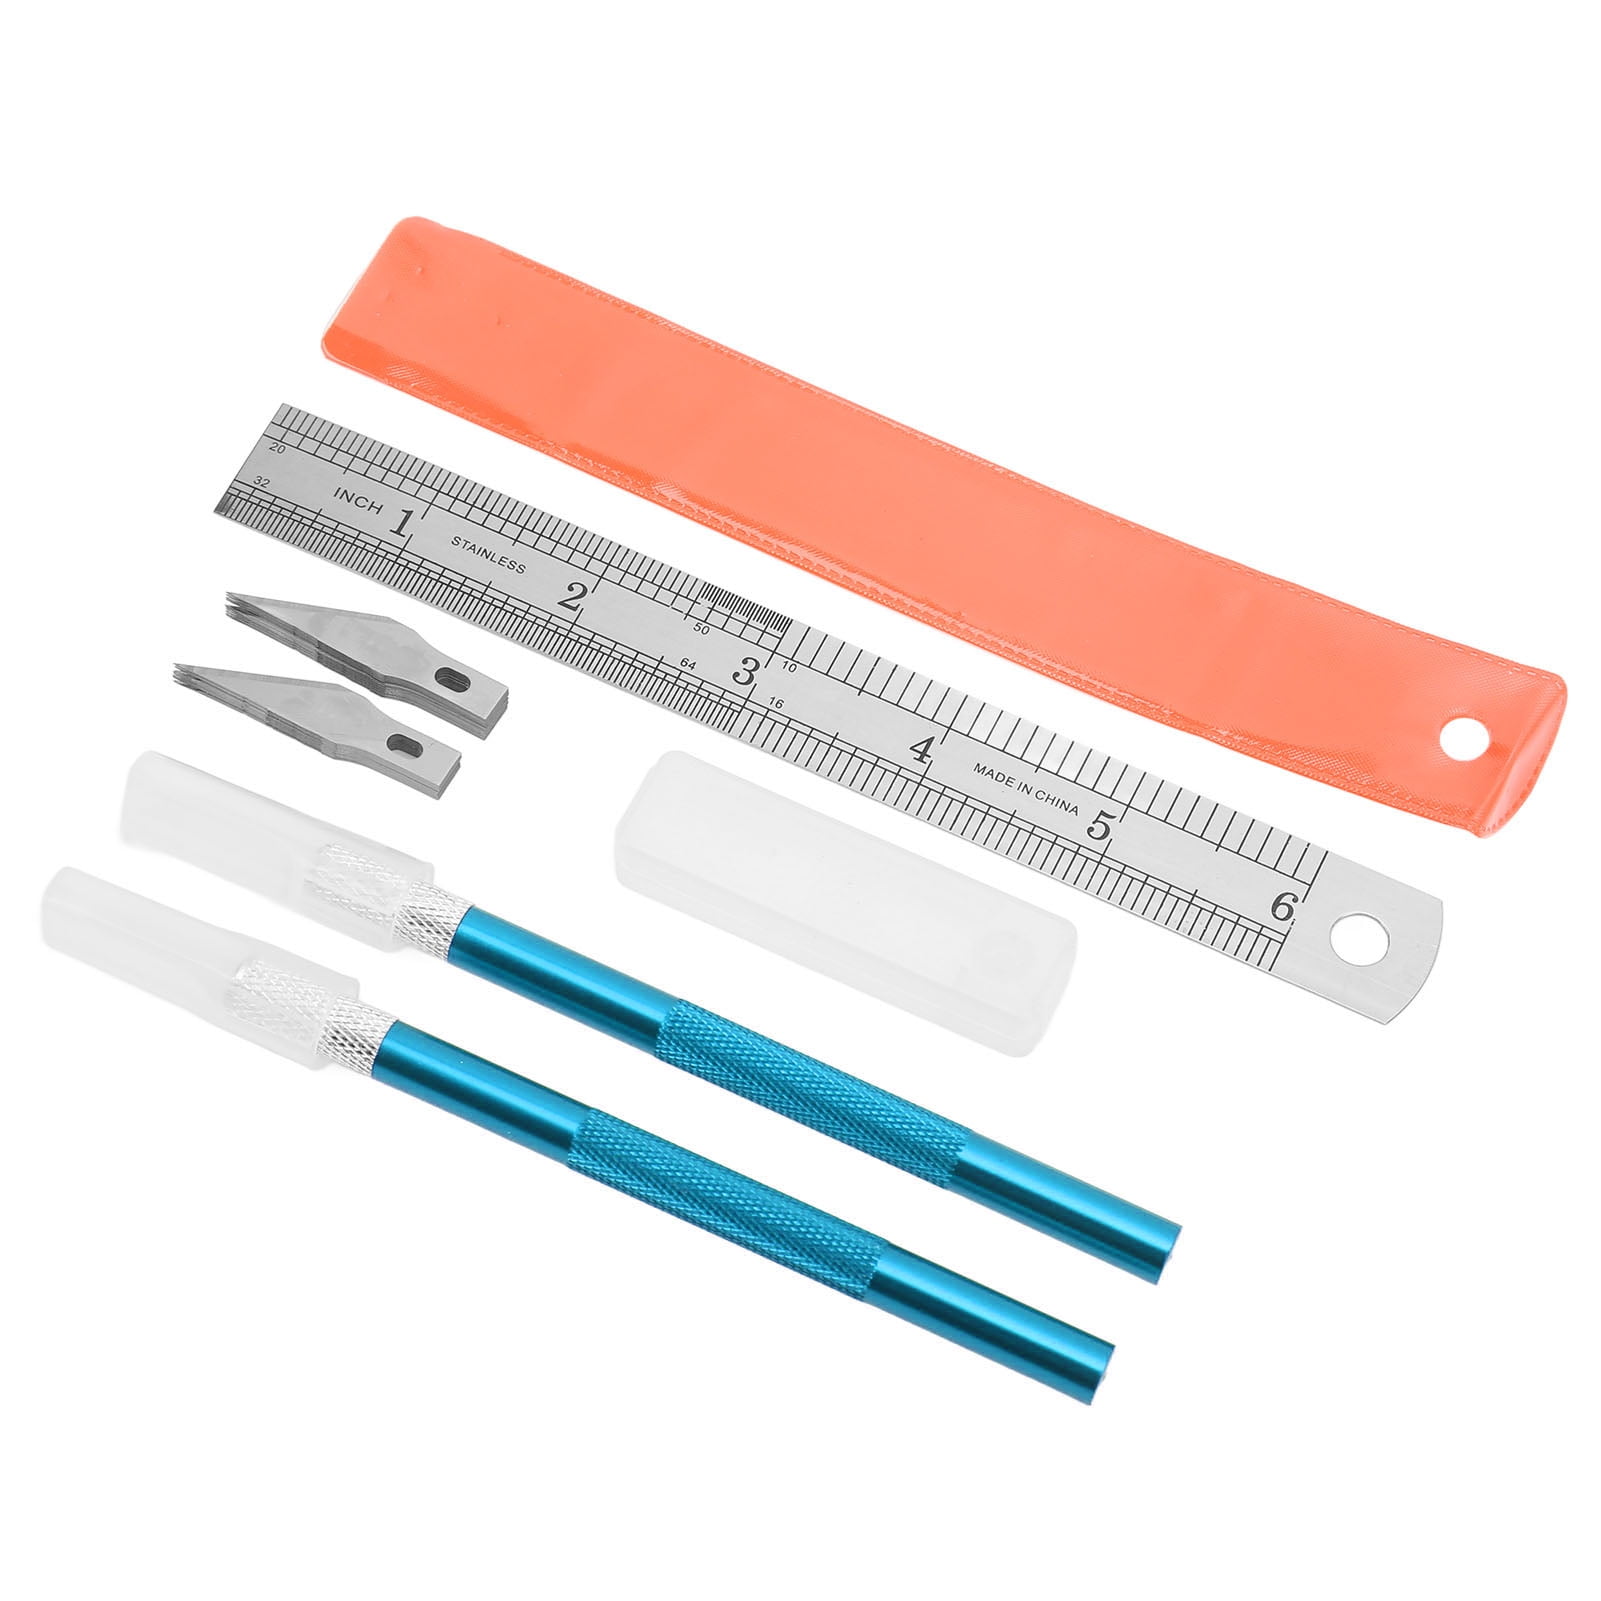 DIYSELF 1Pcs Hobby Knife with Safety Cap and Ruler and 20pcs Craft Knife Blades for Crafting Blue